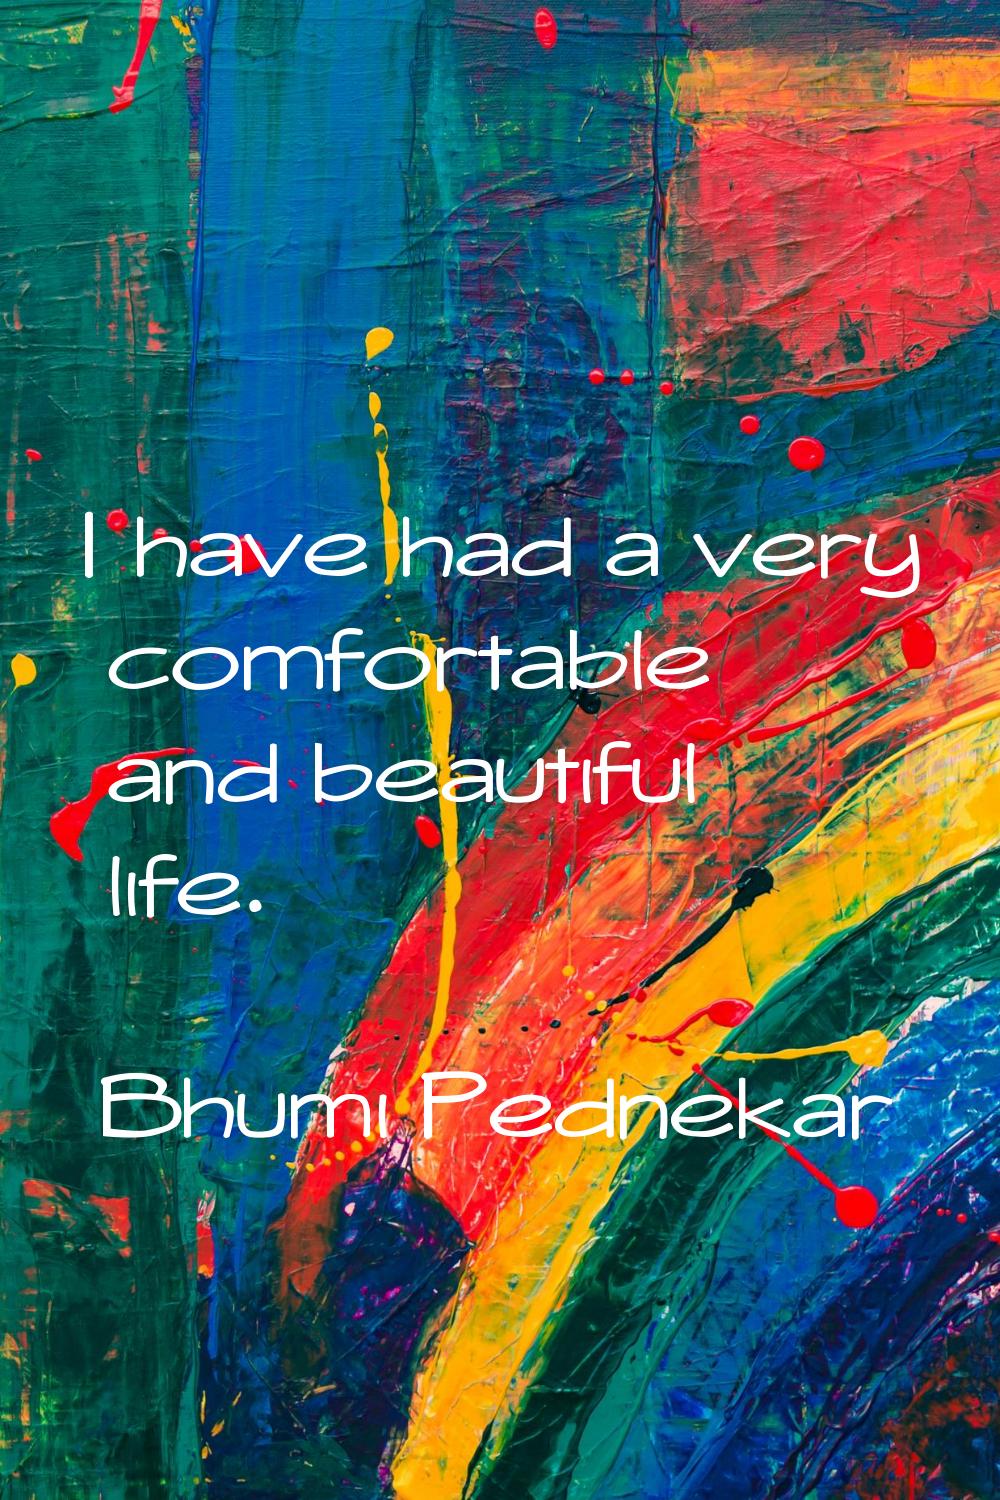 I have had a very comfortable and beautiful life.